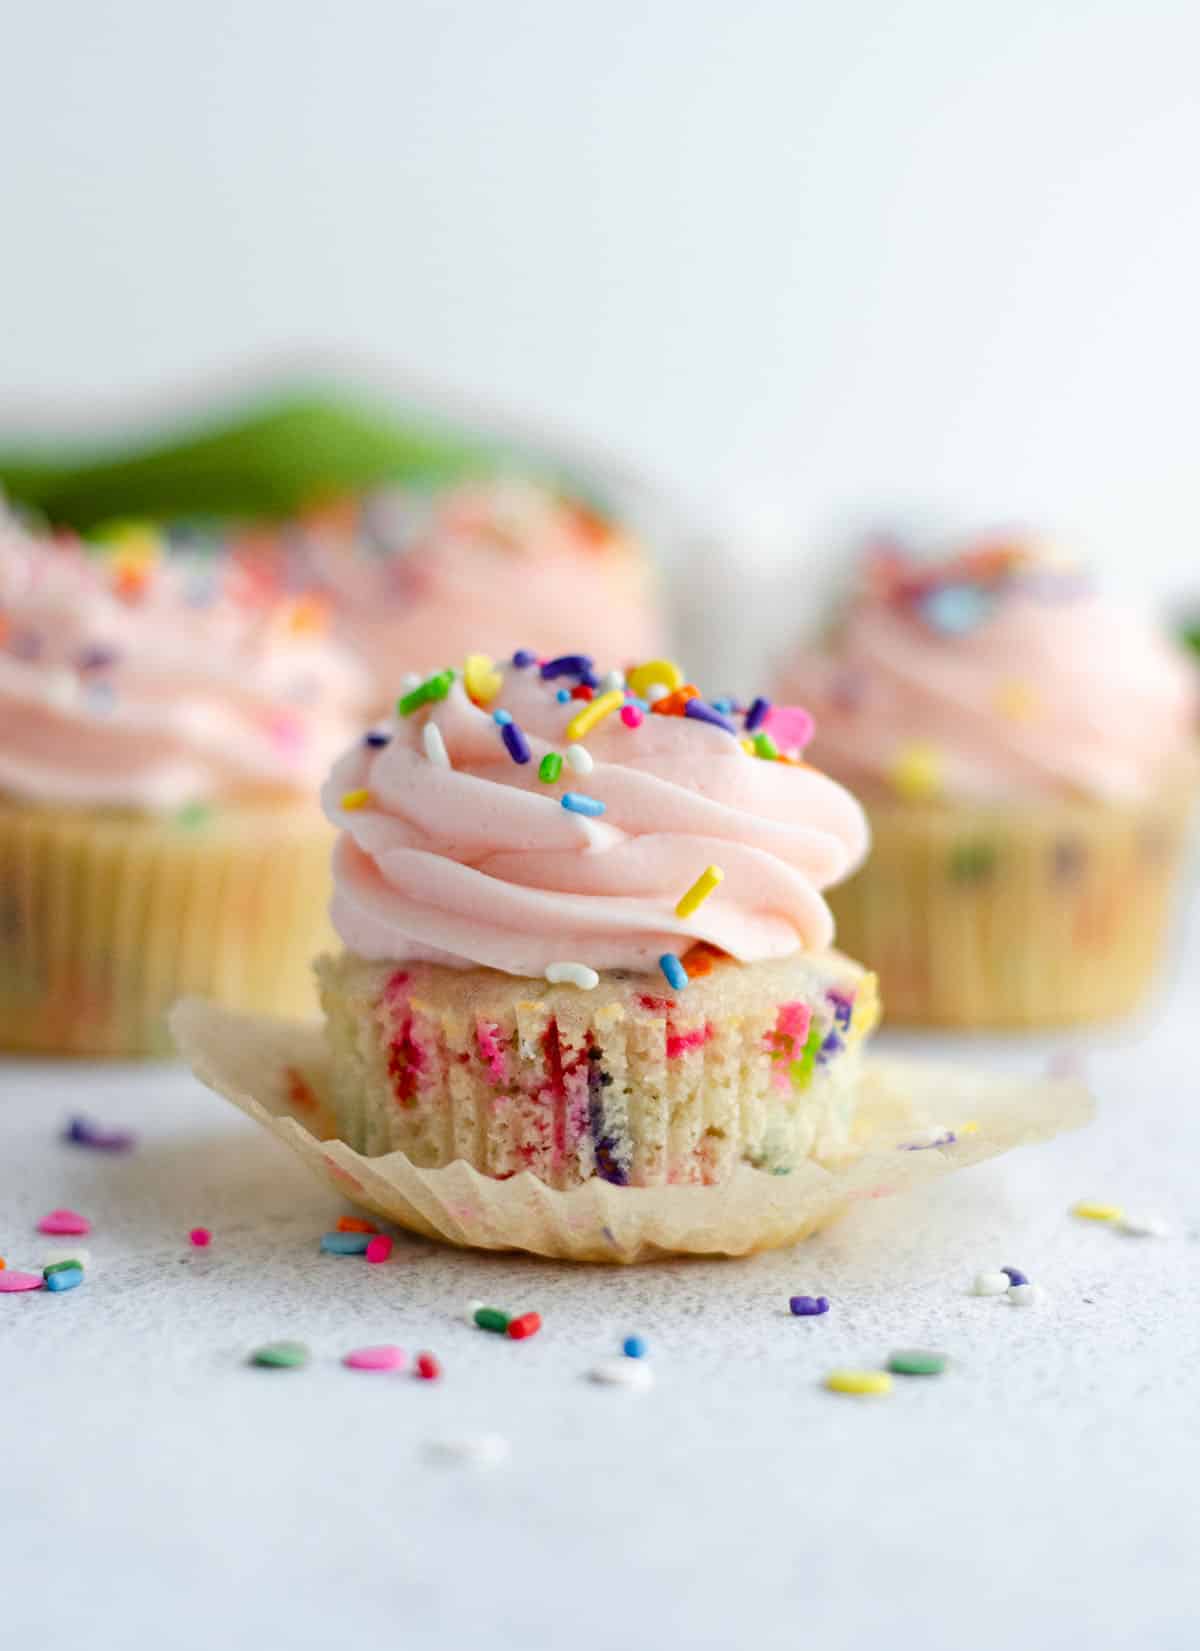 Homemade Funfetti Cupcakes: Sprinkle-speckled cupcakes that taste BETTER than the ones from the box, topped with creamy, sprinkle-filled vanilla buttercream. Ditch the mix and make your own funfetti cupcakes from scratch!